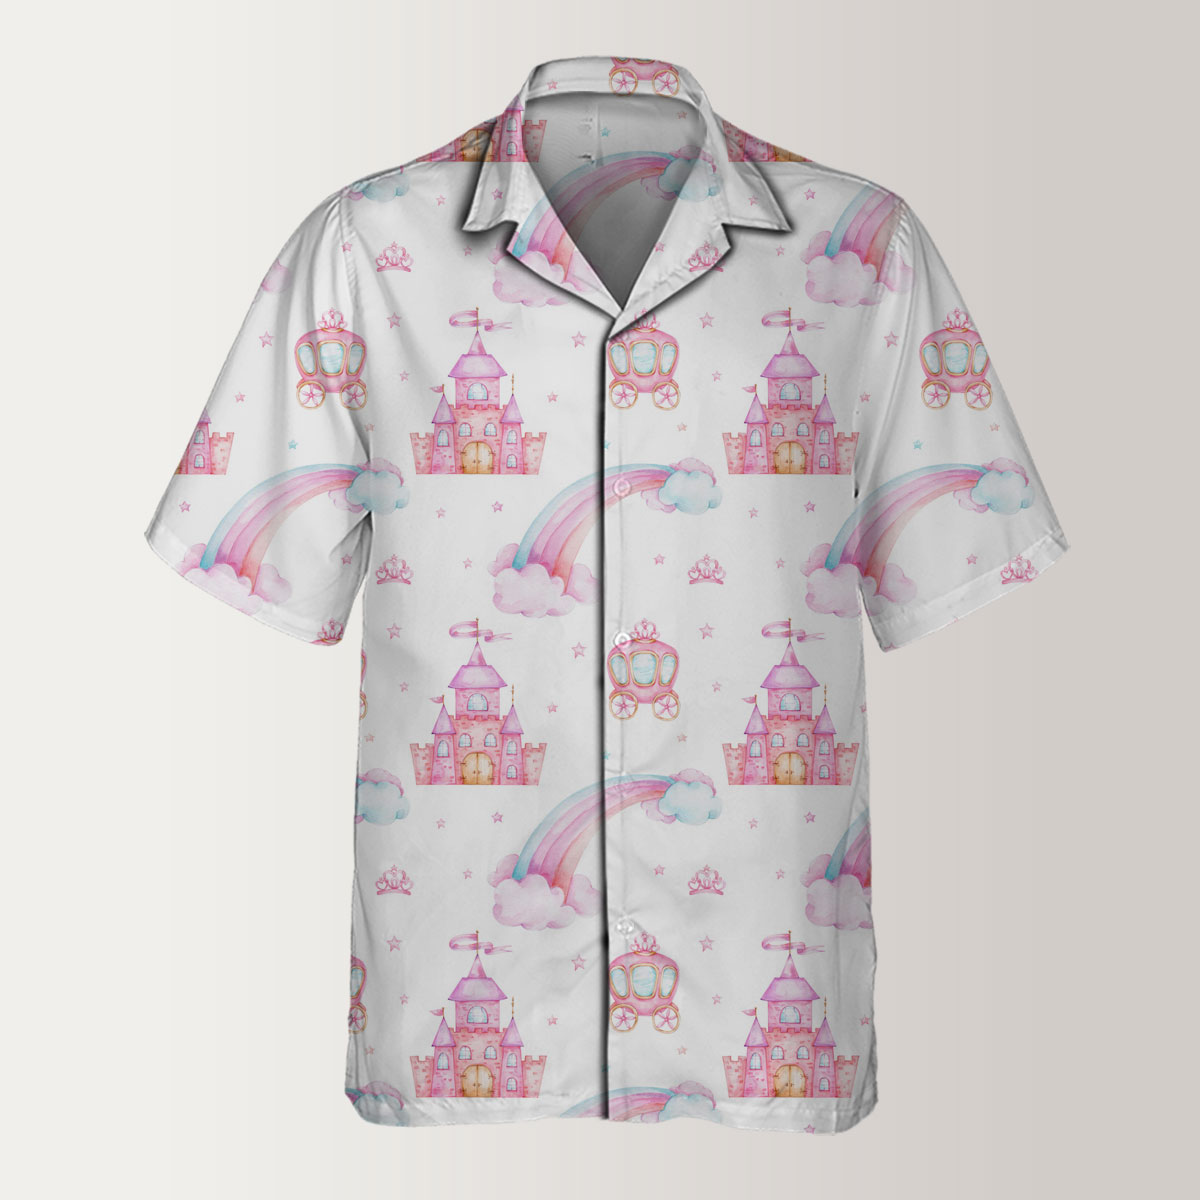 Seamless Pattern With Rainbow, Carriage And Castle Hawaiian Shirt